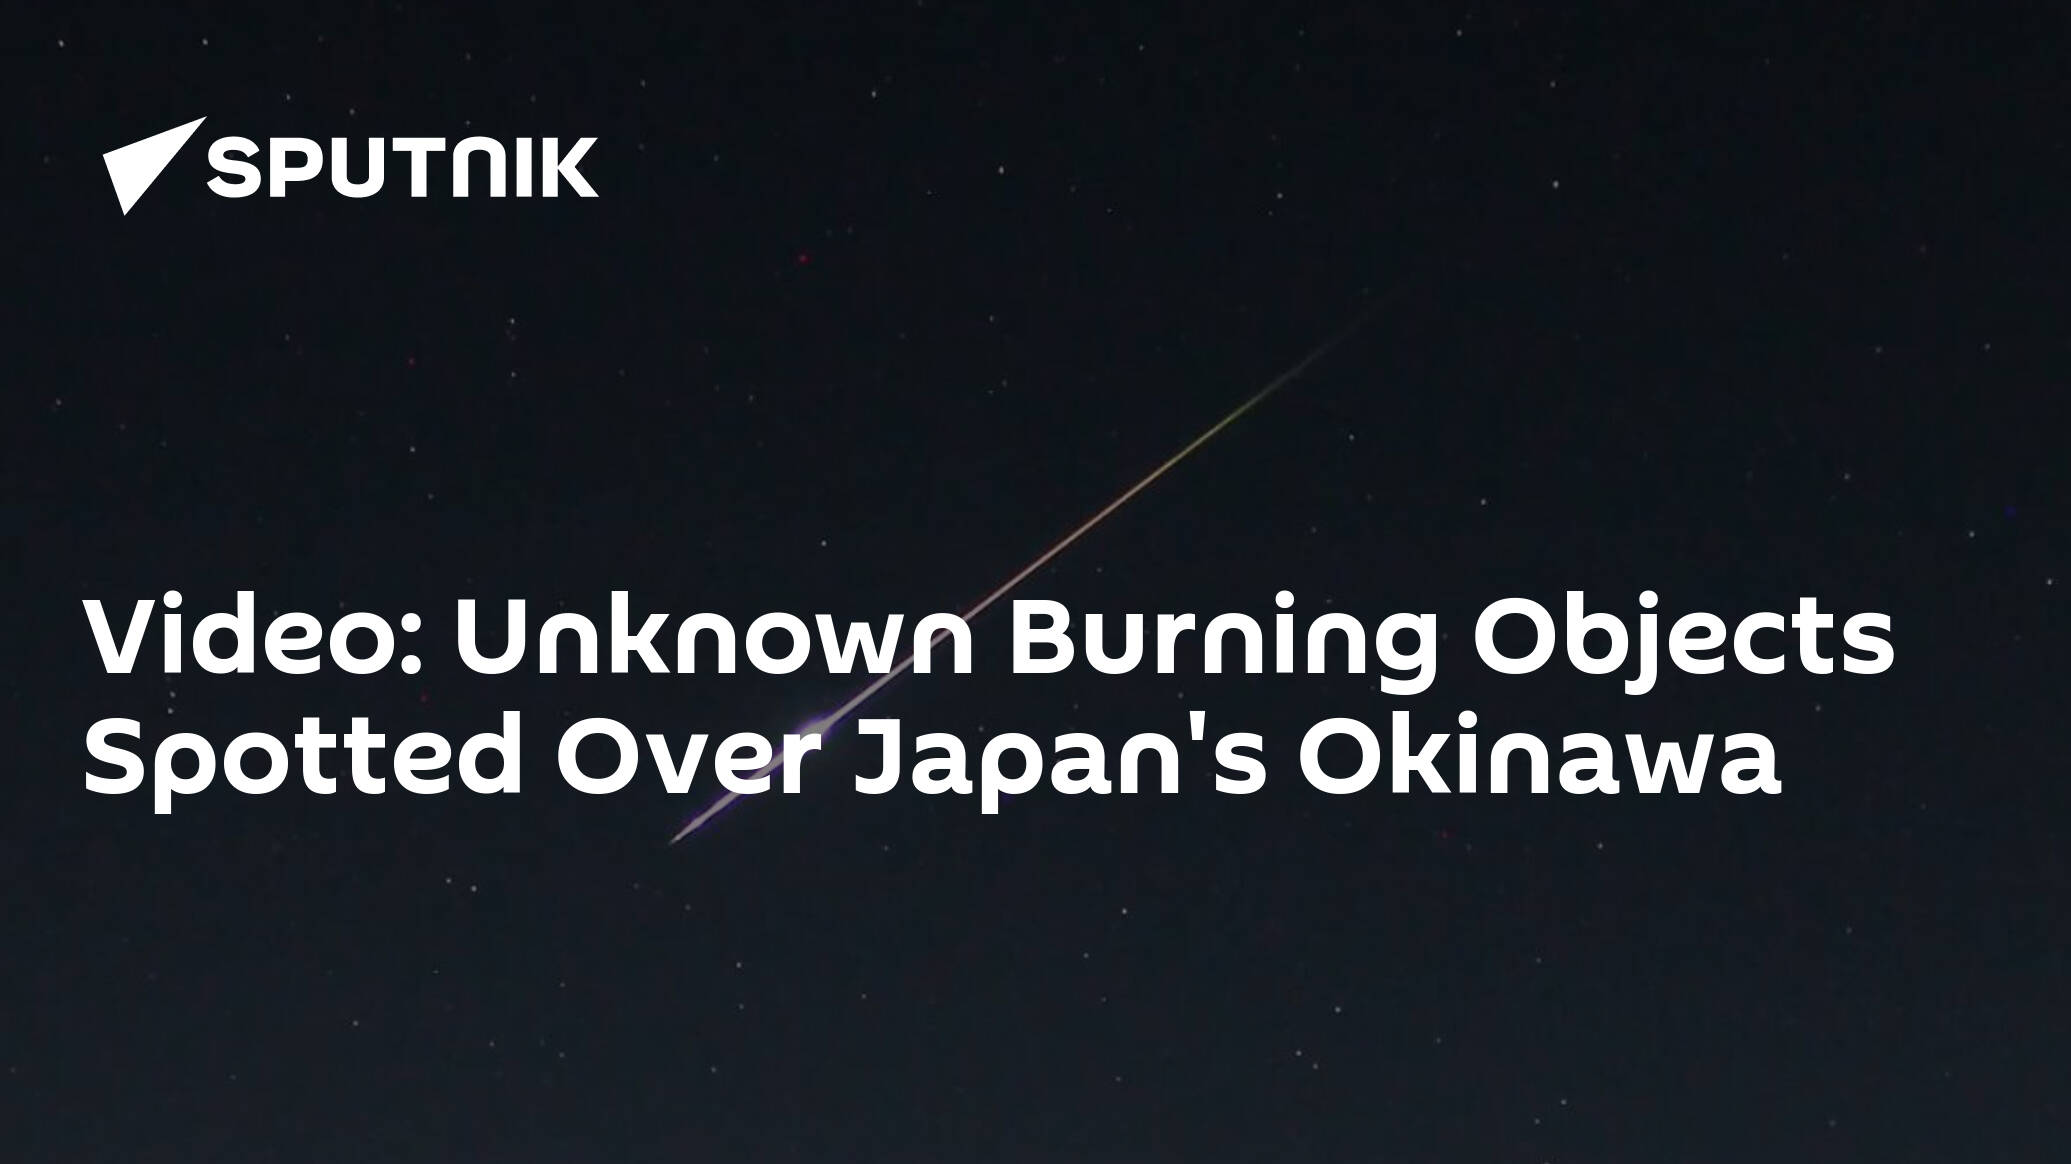 Video: Unknown Burning Objects Spotted Over Japan's Okinawa